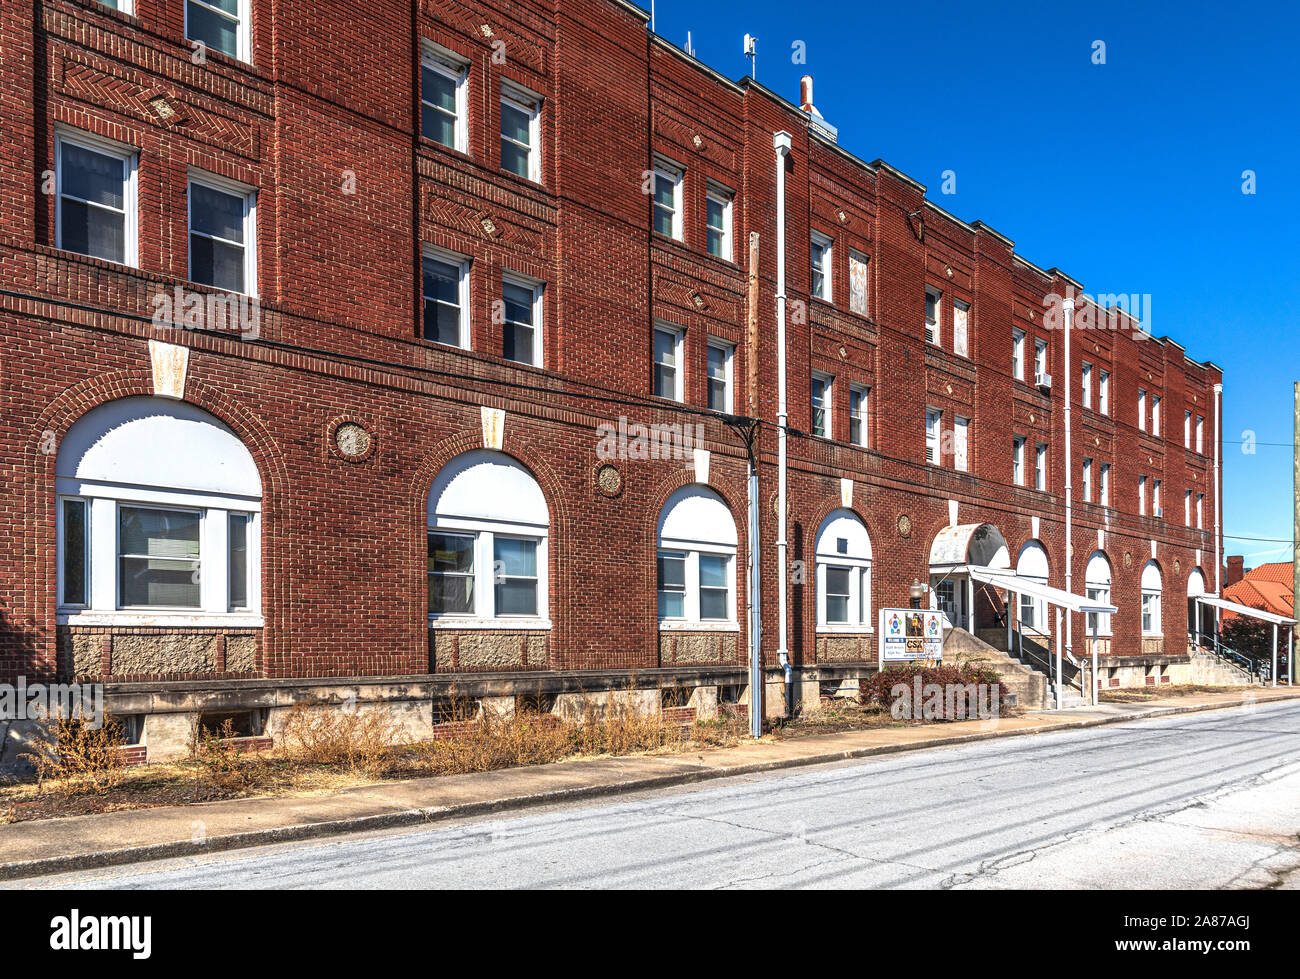 ERWIN, TN, USA-28 OCT 2019: Brick office building of CSX Transportation, a railroad operating in eastern U.S.  The large building originally served fo Stock Photo